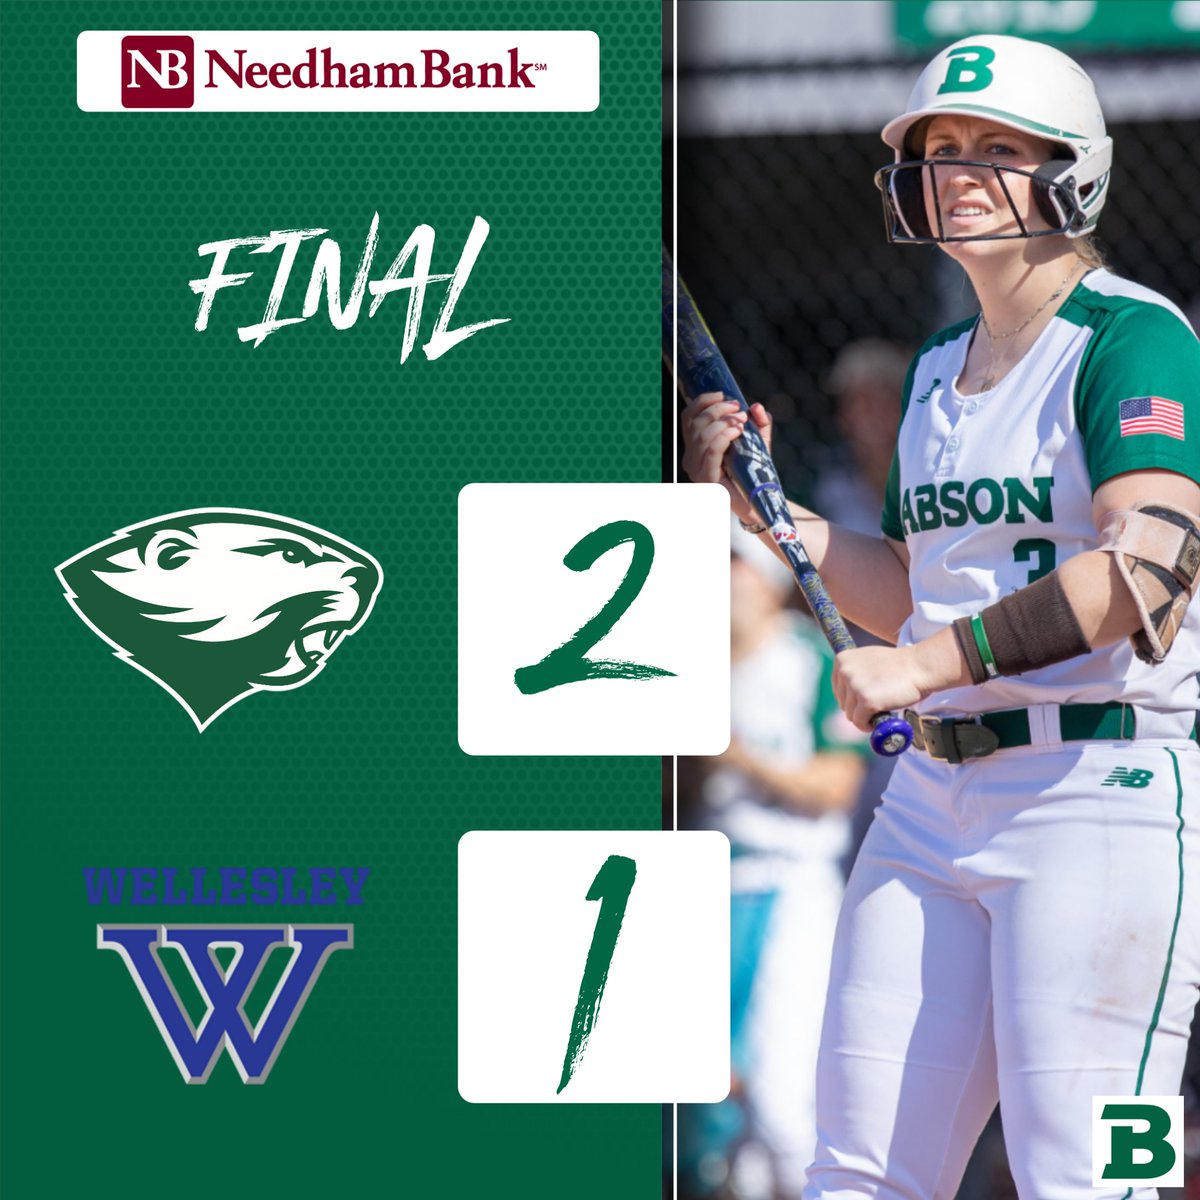 Molly Hennessy dropped a one-out single into short right field in the bottom of the 7th to score Charlotte Raymond as @babsonsoftball defeated @WellesleyBlue 2-1 in game one of Friday's doubleheader. #GoBabo #d3sb